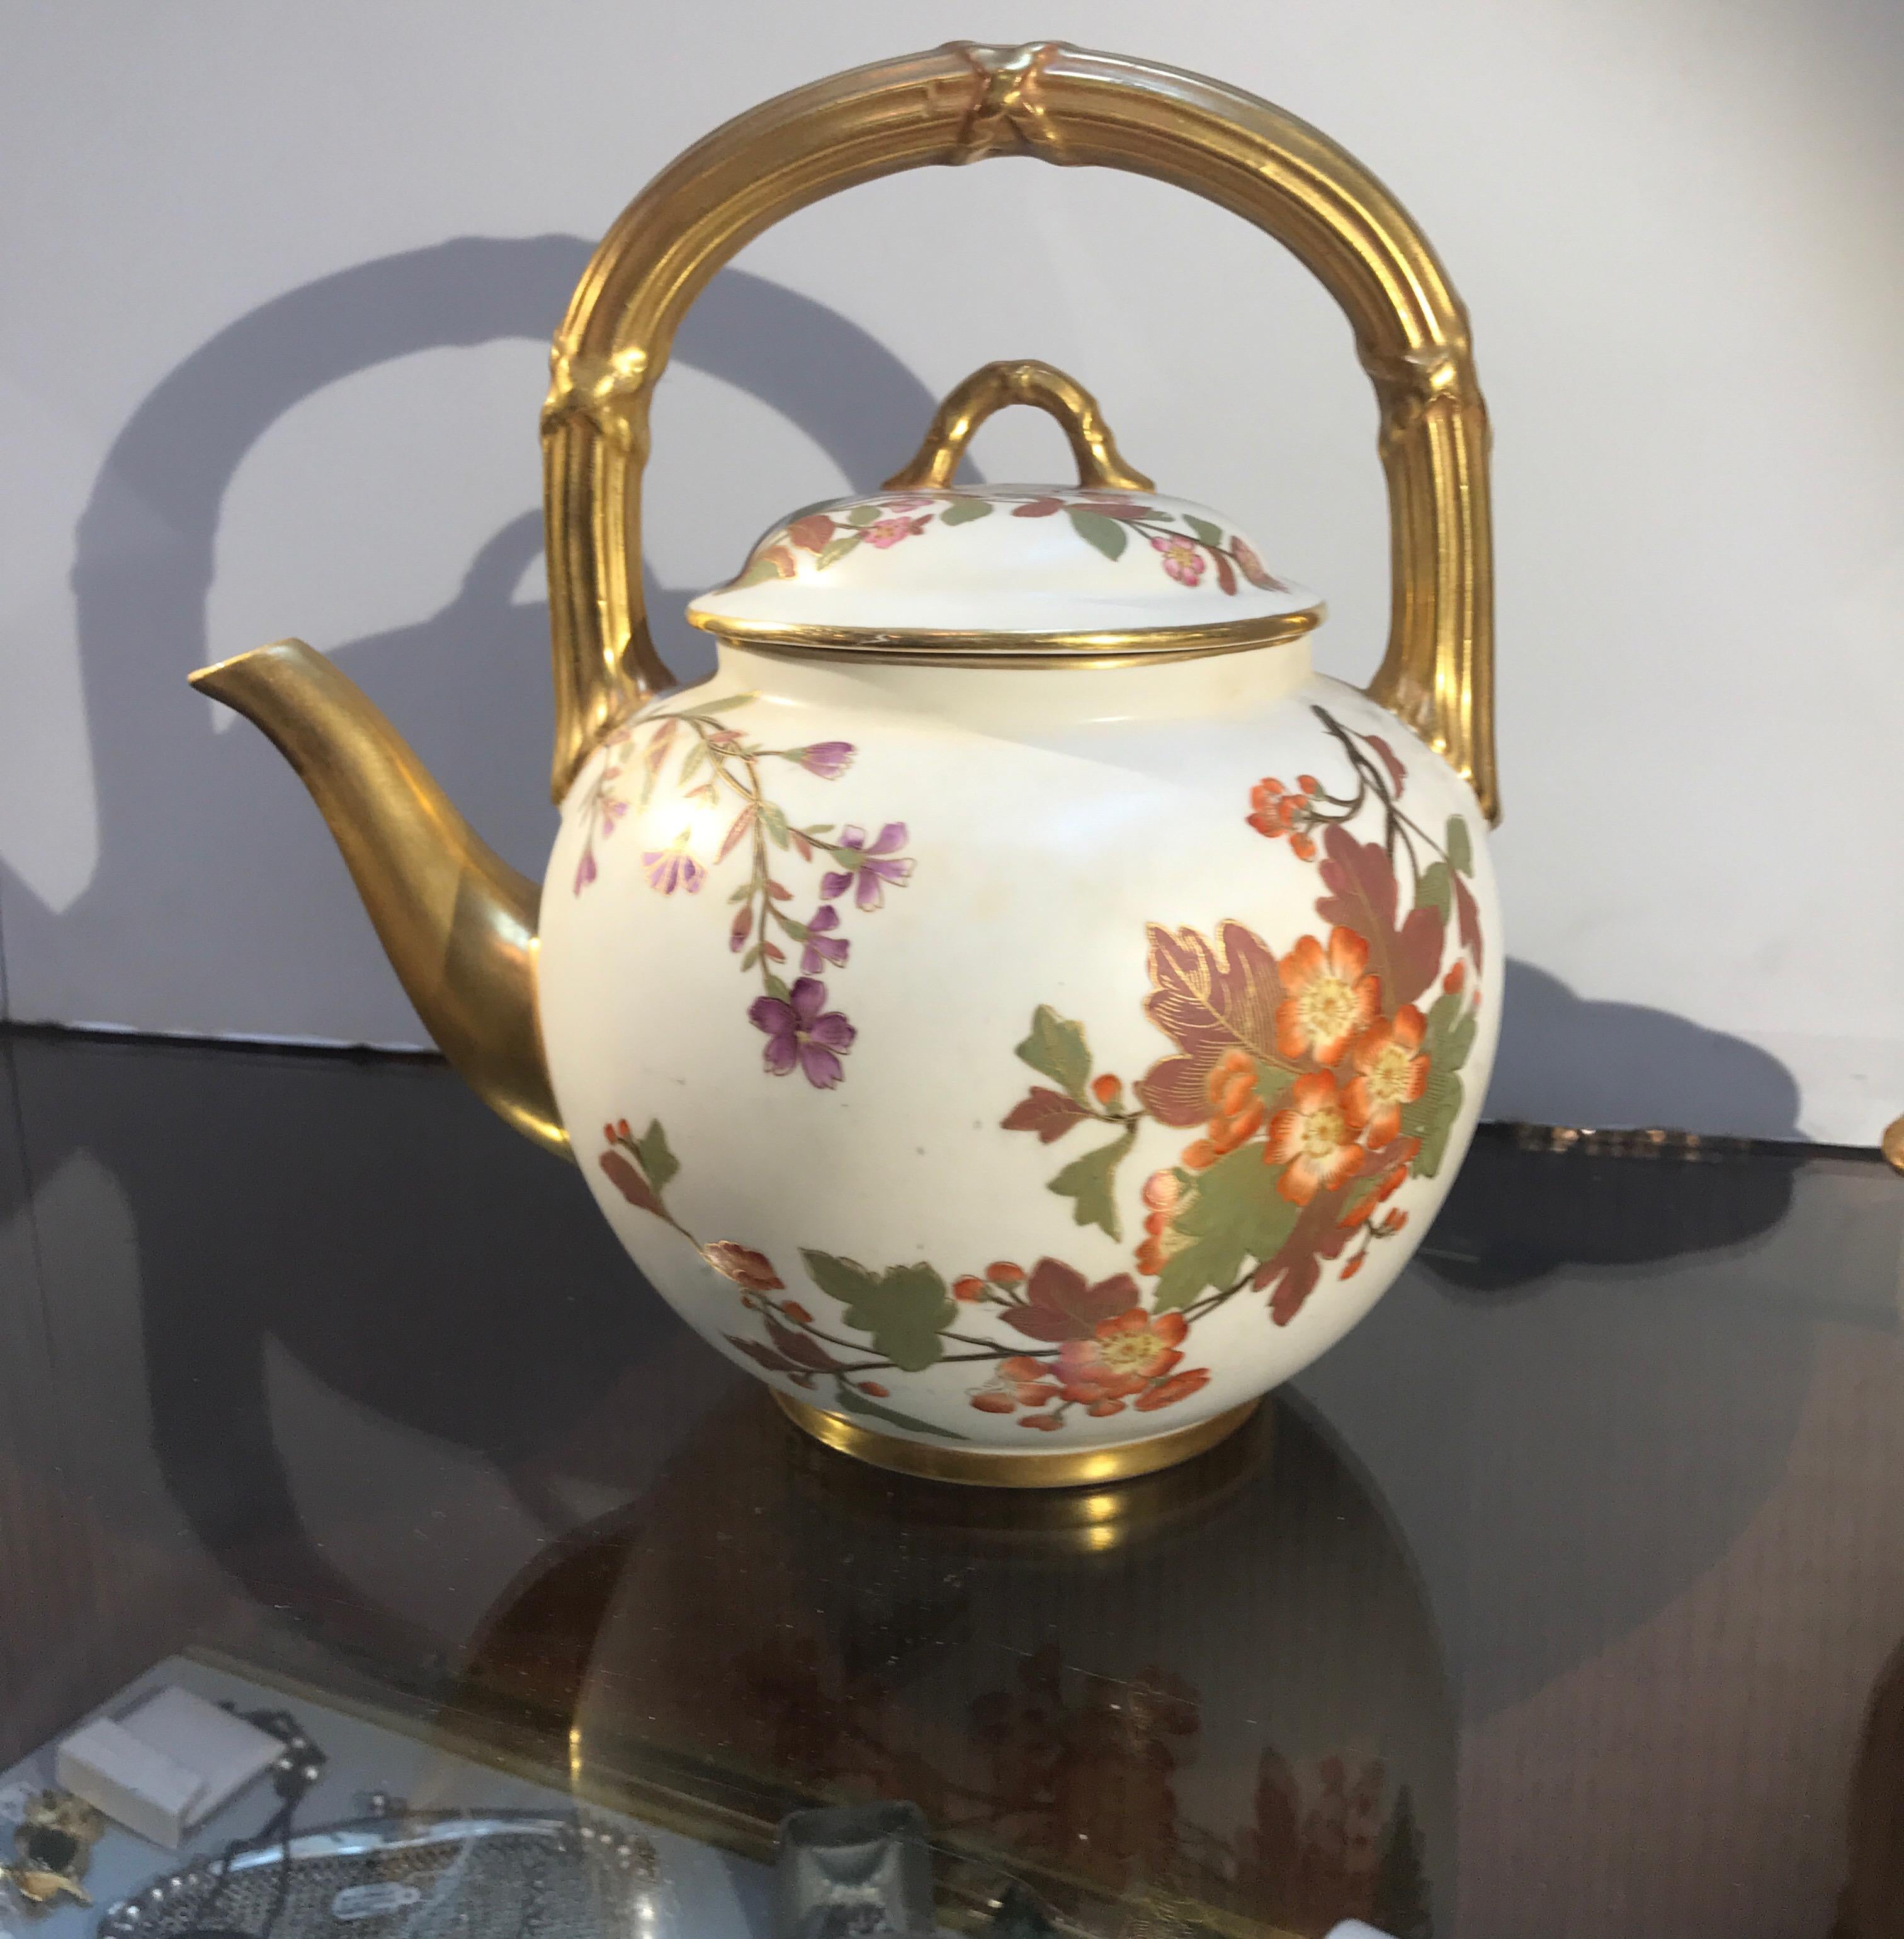 Beautiful hand painted porcelain tea set by Royal Worcester, England. The hand painted floral decoration with gilt trim and handles. Each piece is year marked for 1889 and represents the Aesthetic Movement of the 19th century.
Teapot is 8